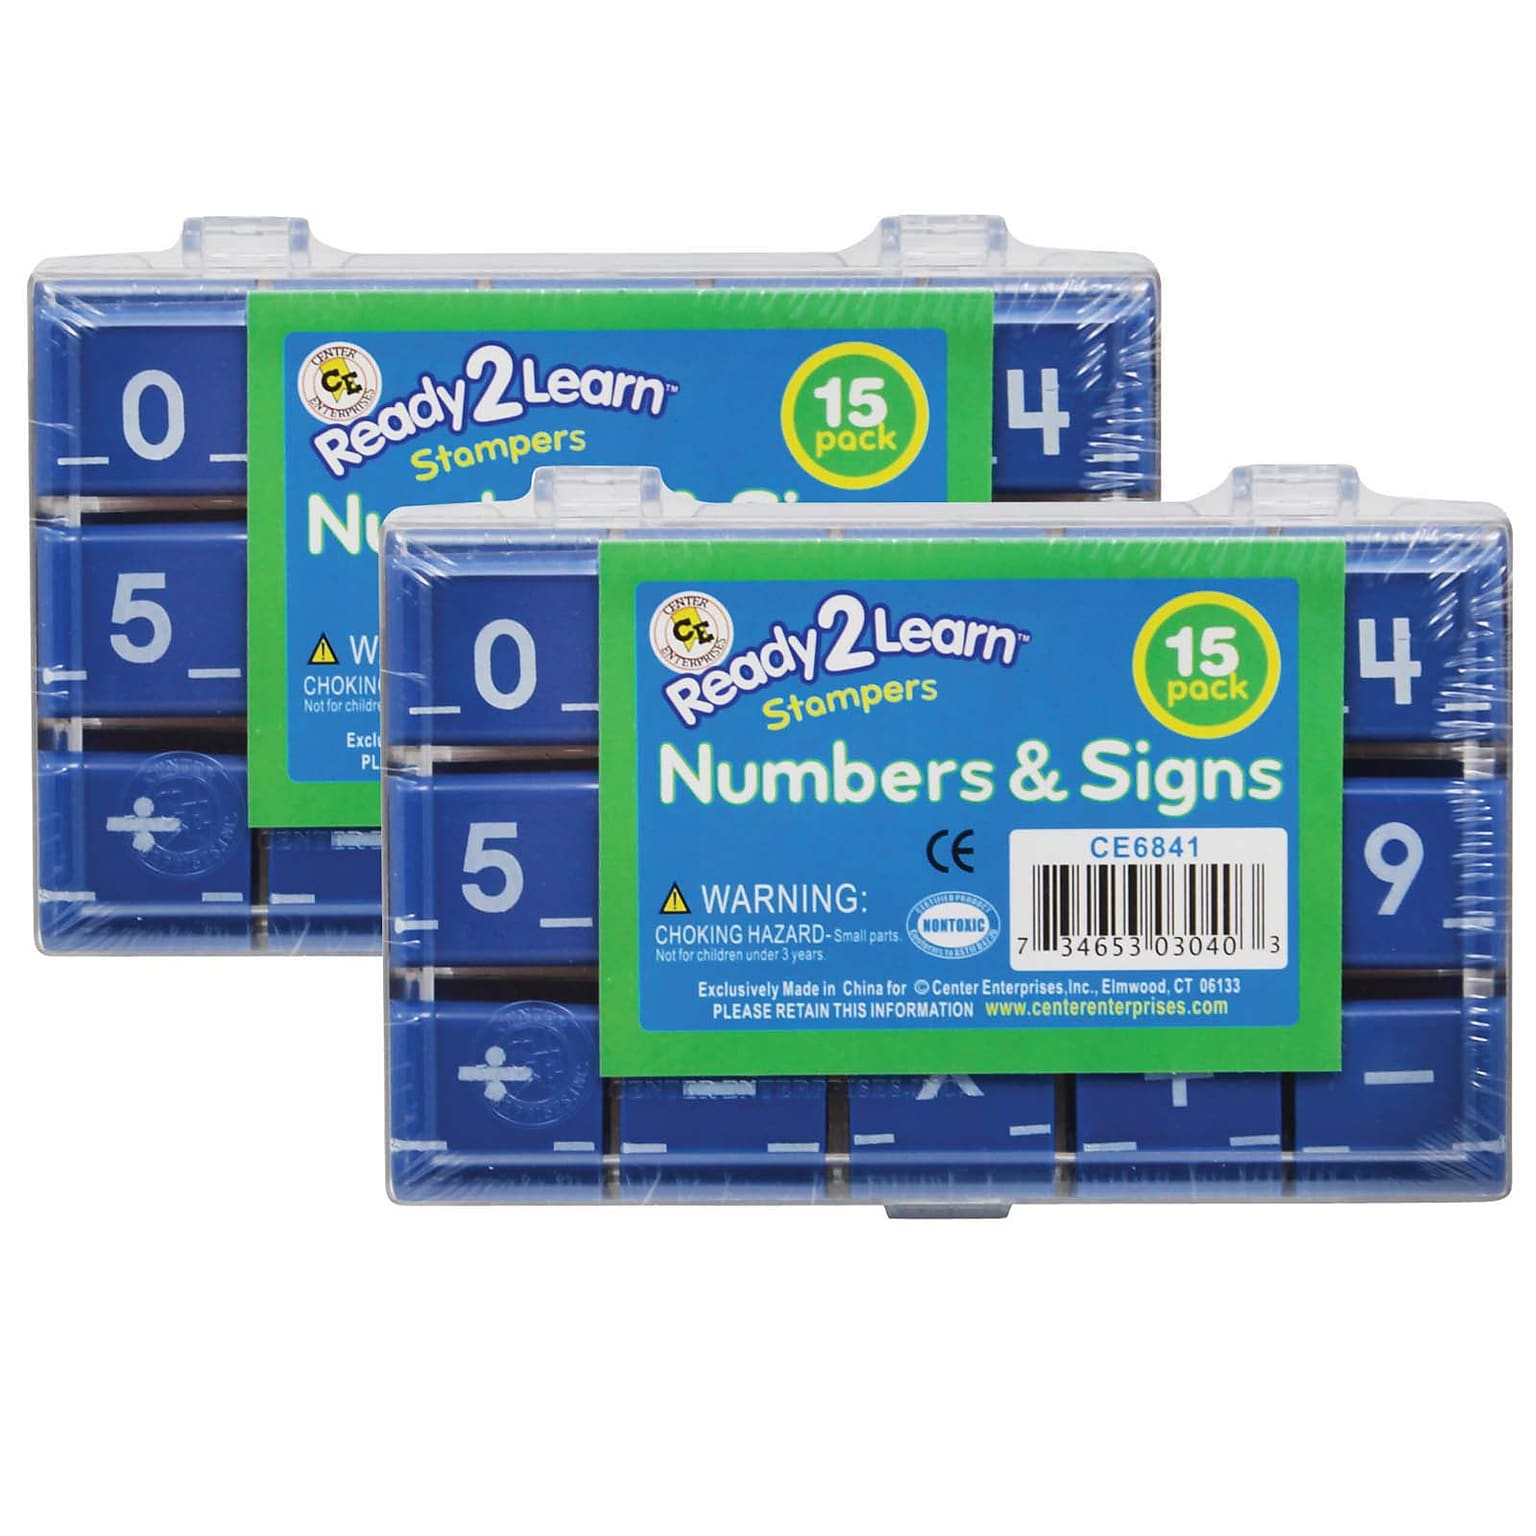 Ready 2 Learn Numbers & Signs Stamps, 2/Bundle (CE-6841-2)